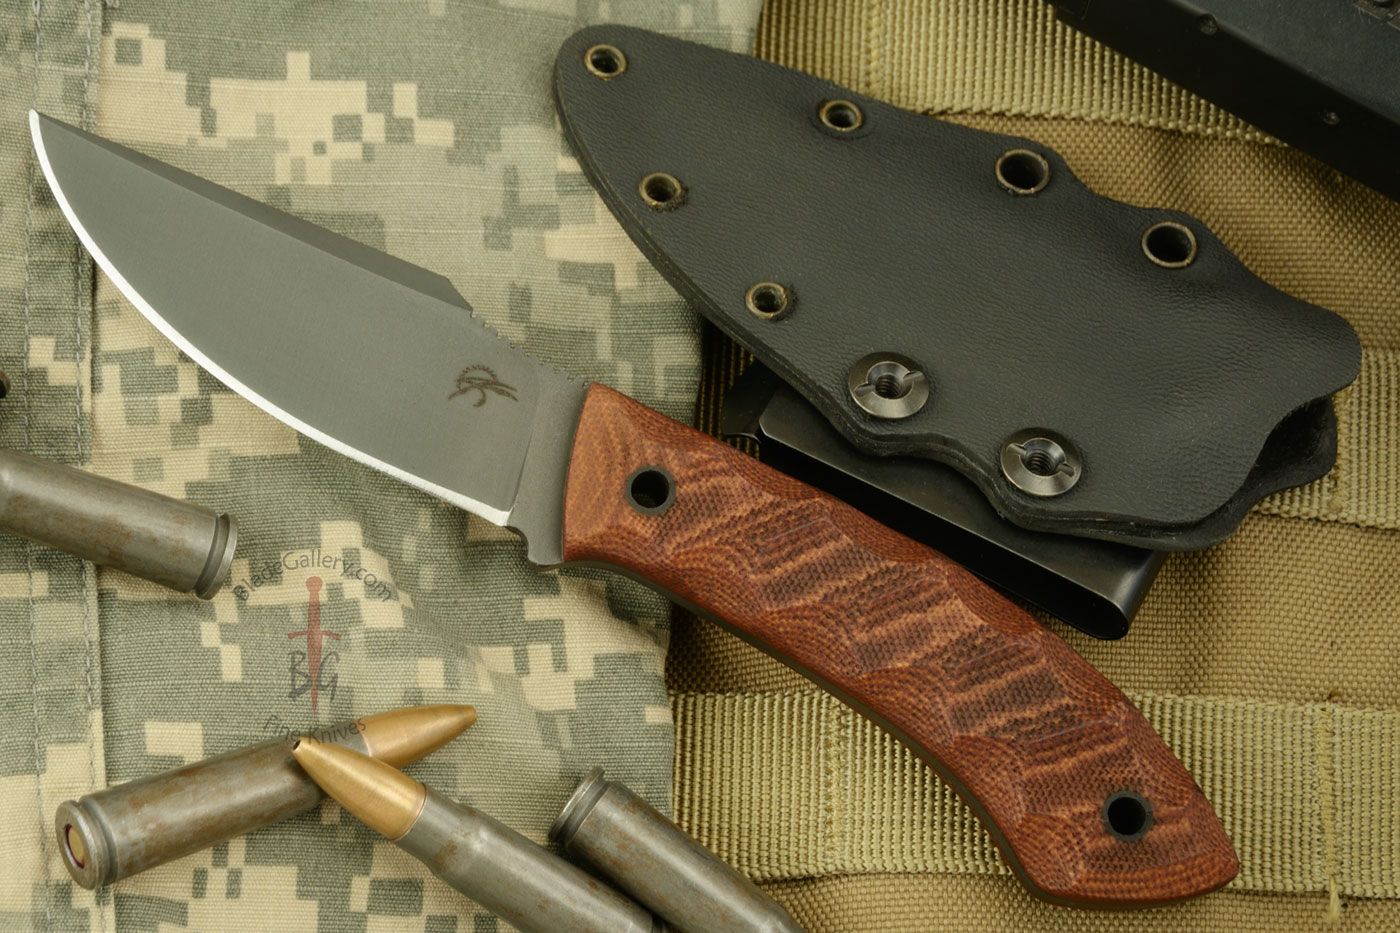 Everycarry with Sculpted Relic Tan Micarta (Jason Knight Collaboration)